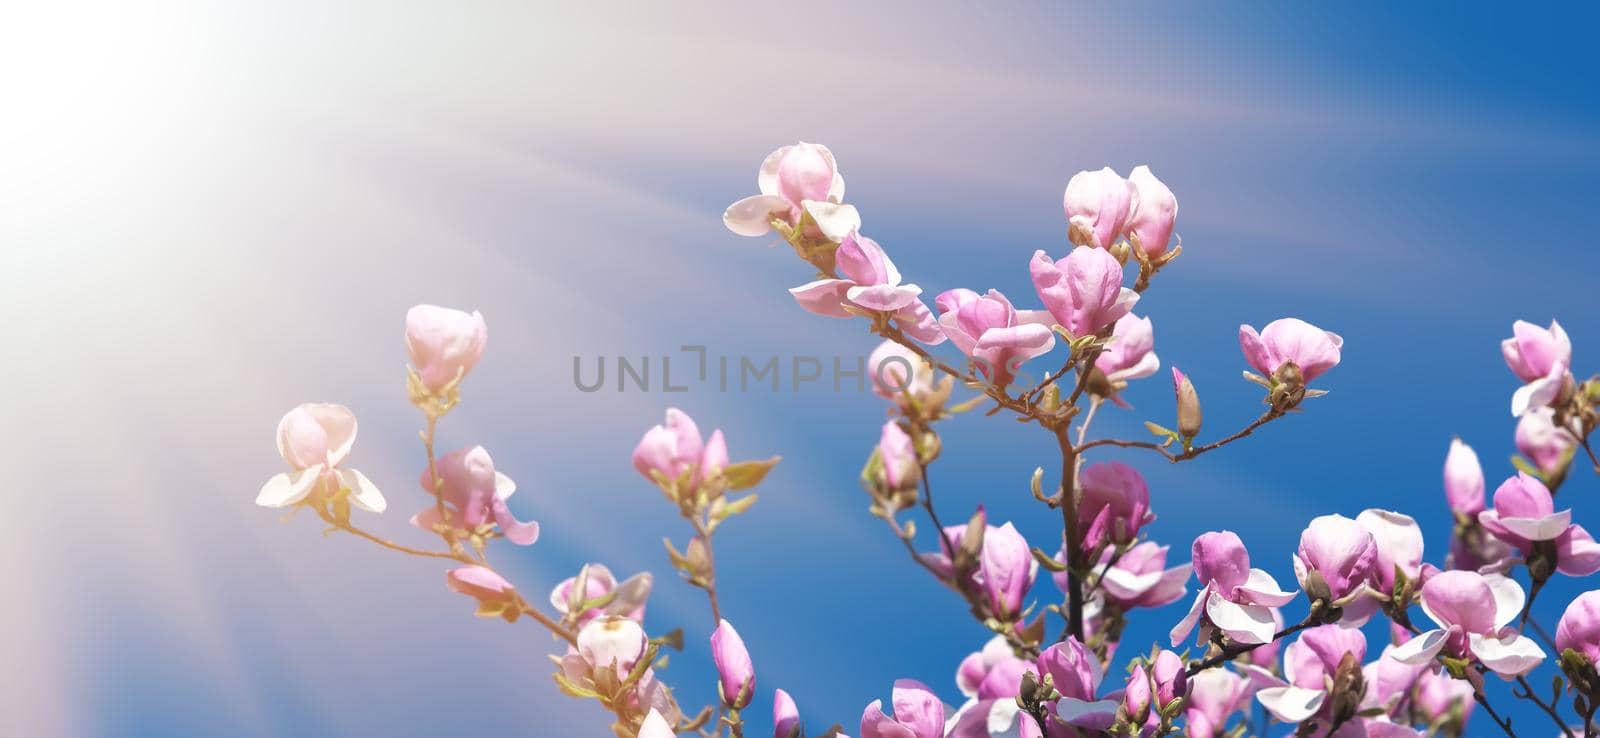 Nature background concept. Pink magnolia flowers in sun light against the blue sky backgroun. Magnolia flowers in spring time.